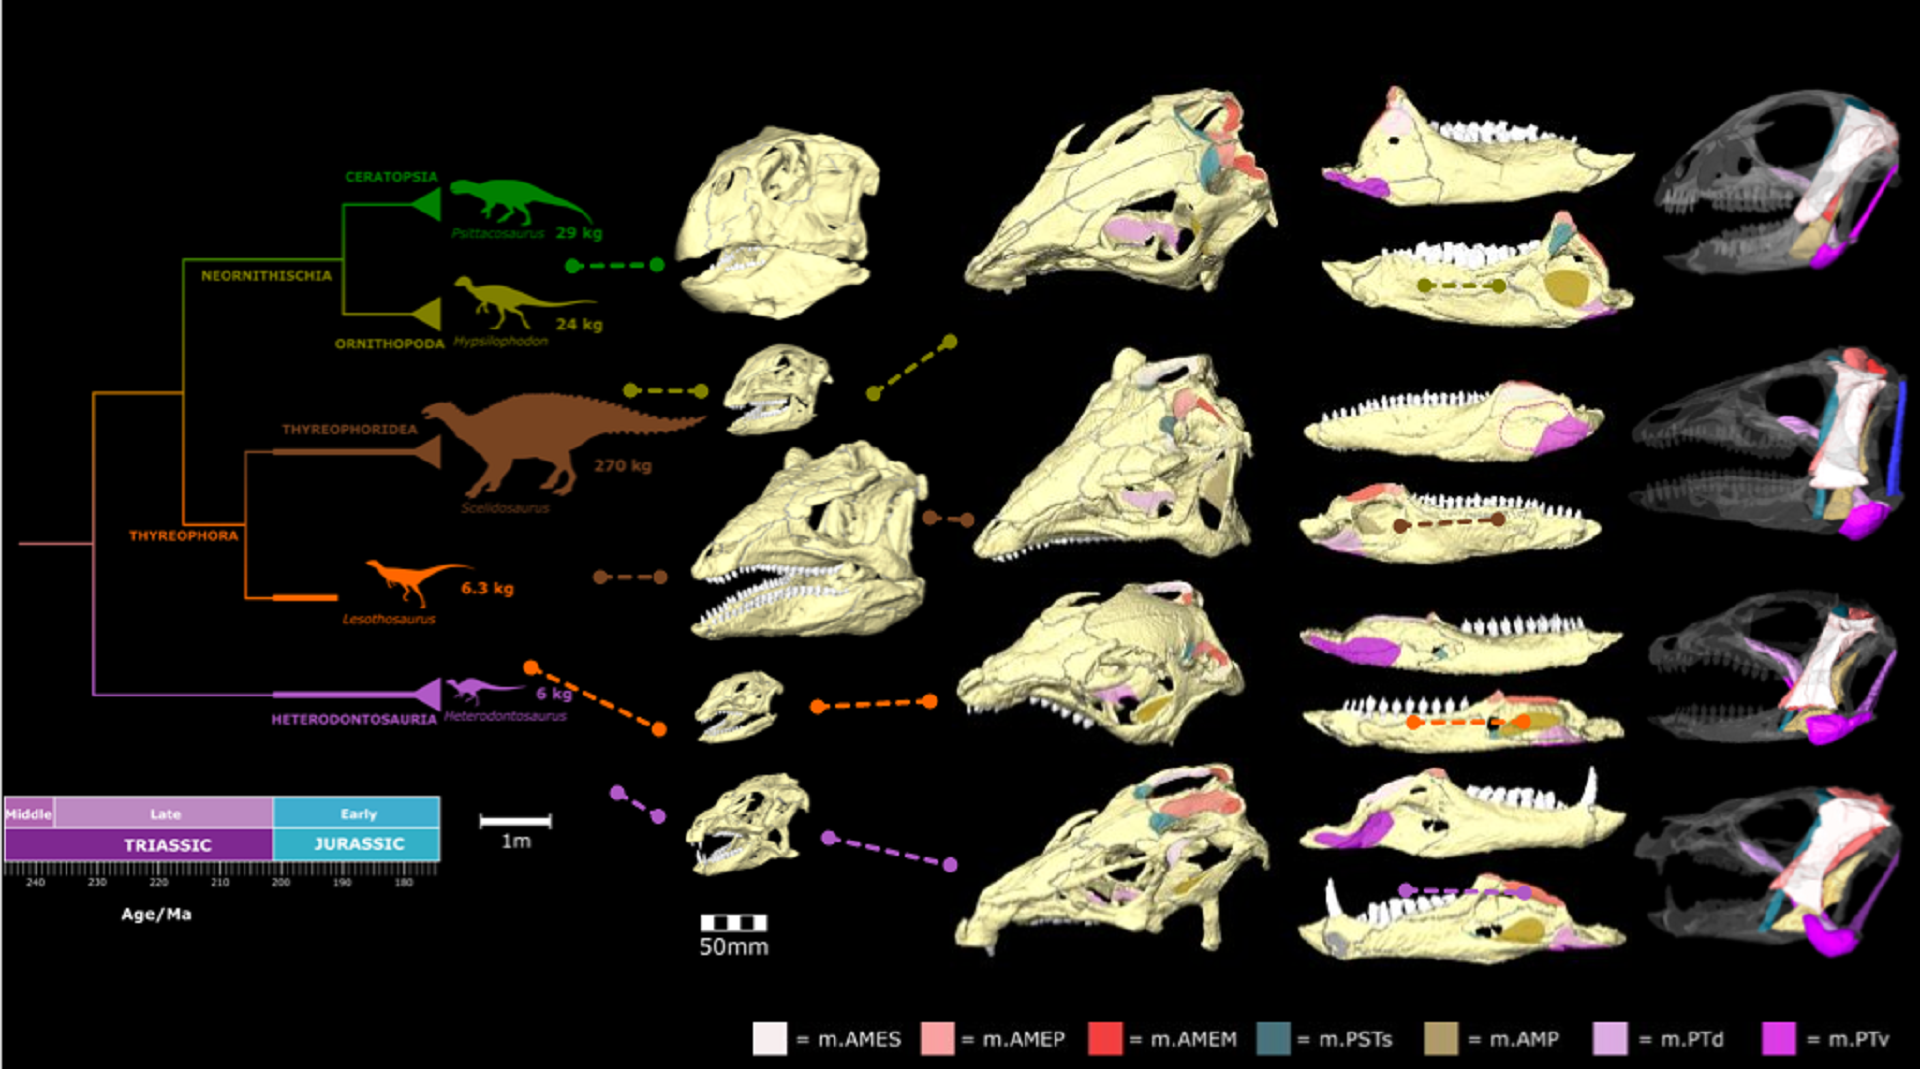 CT reconstructions of the skulls and jaws 